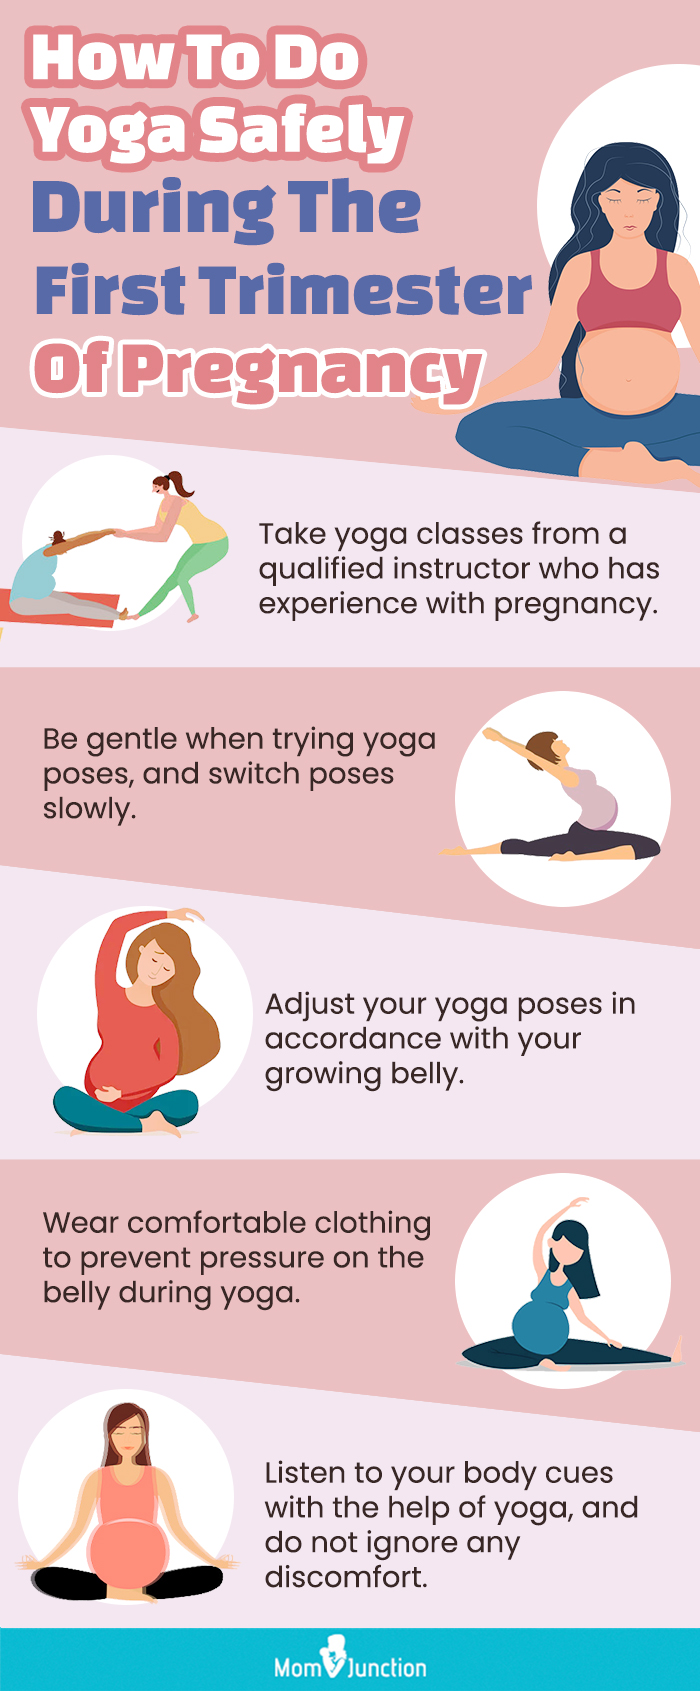 6 Prenatal Yoga Poses For Your 1st Trimester